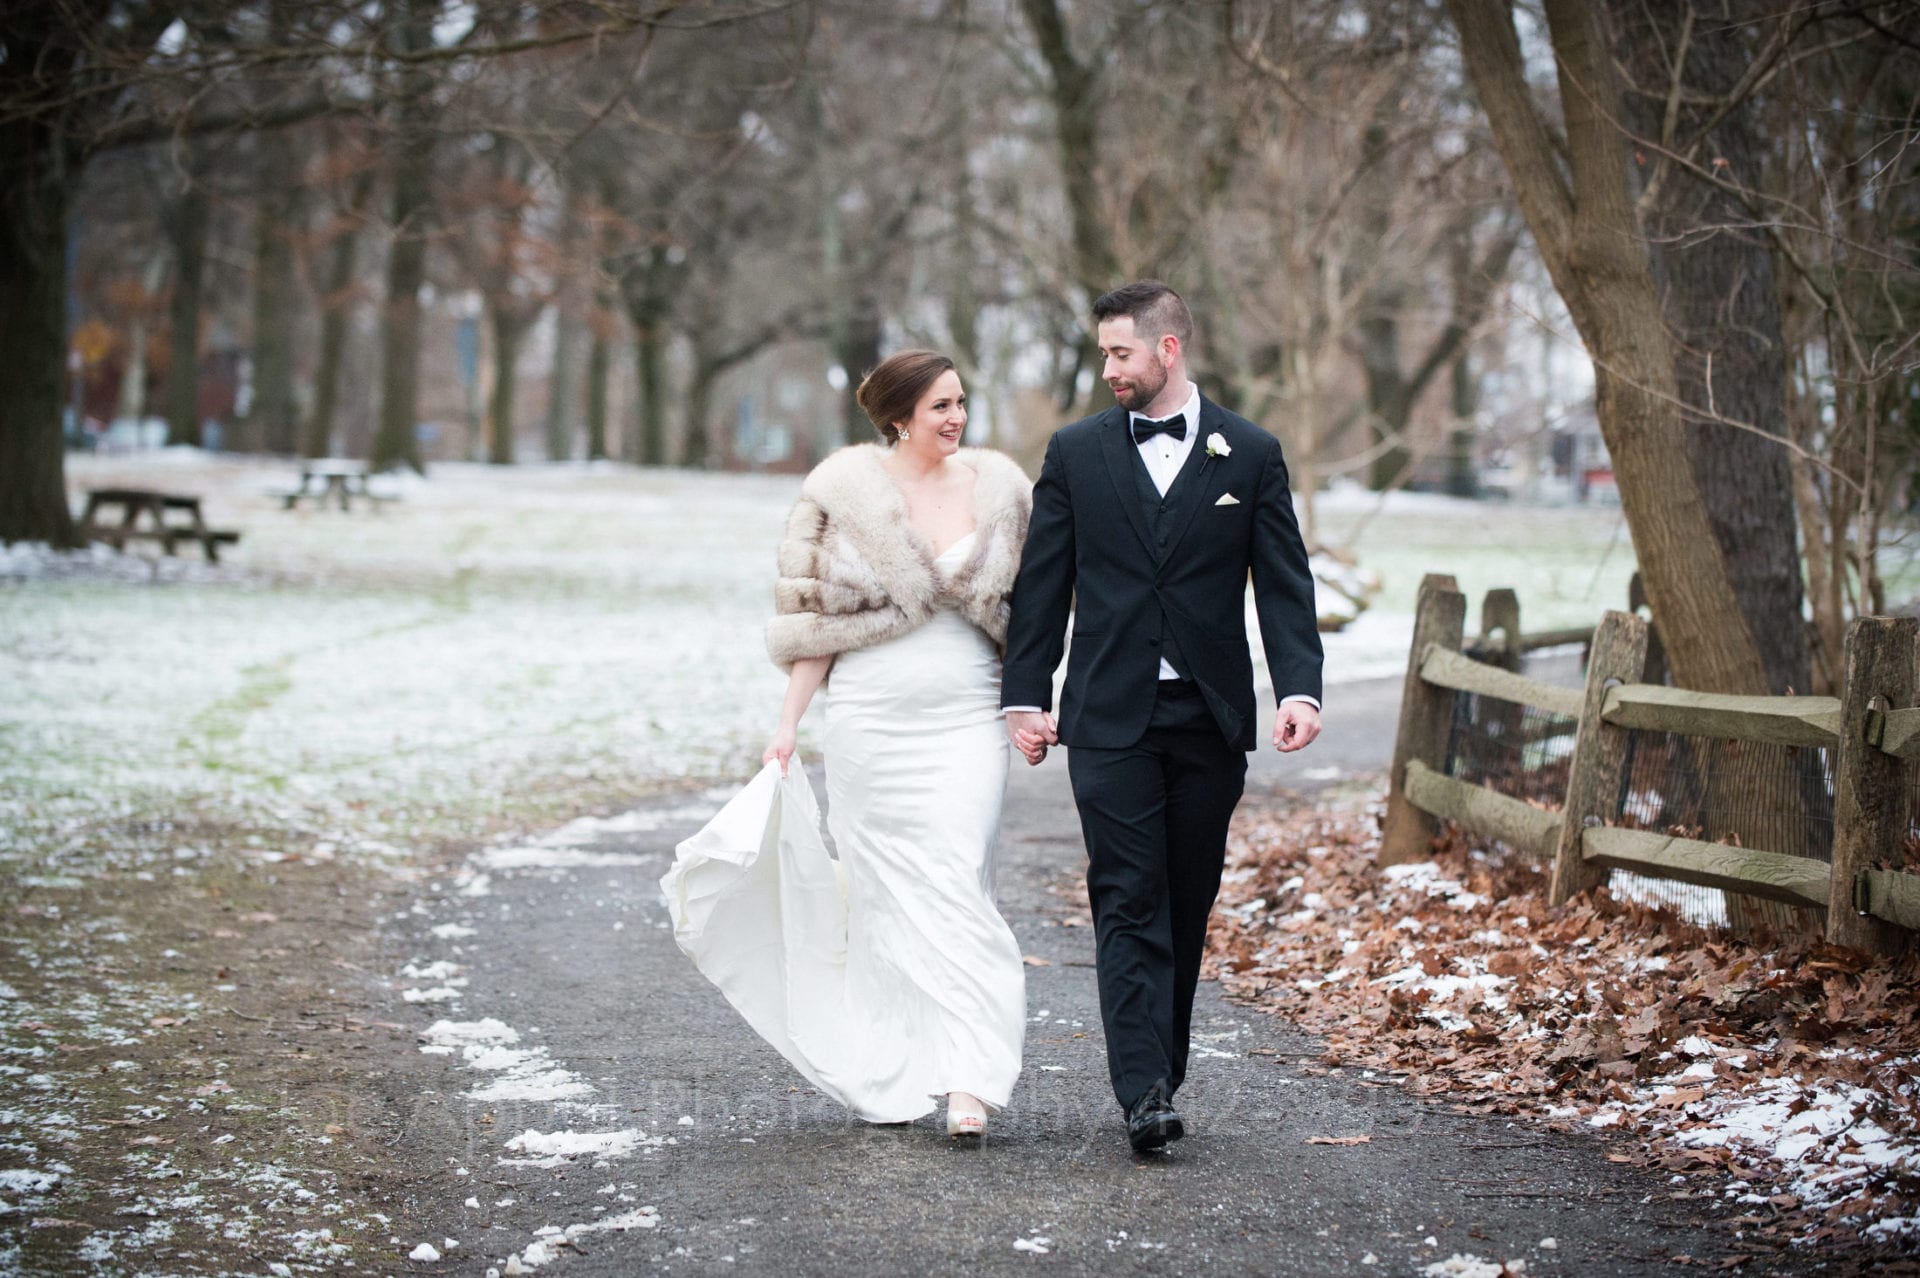 A bride and groom hold hands and look at each other as they walk down a gravel path next to a split rail fence on one side and a snow dusted forest glade on the other in Frick Park.